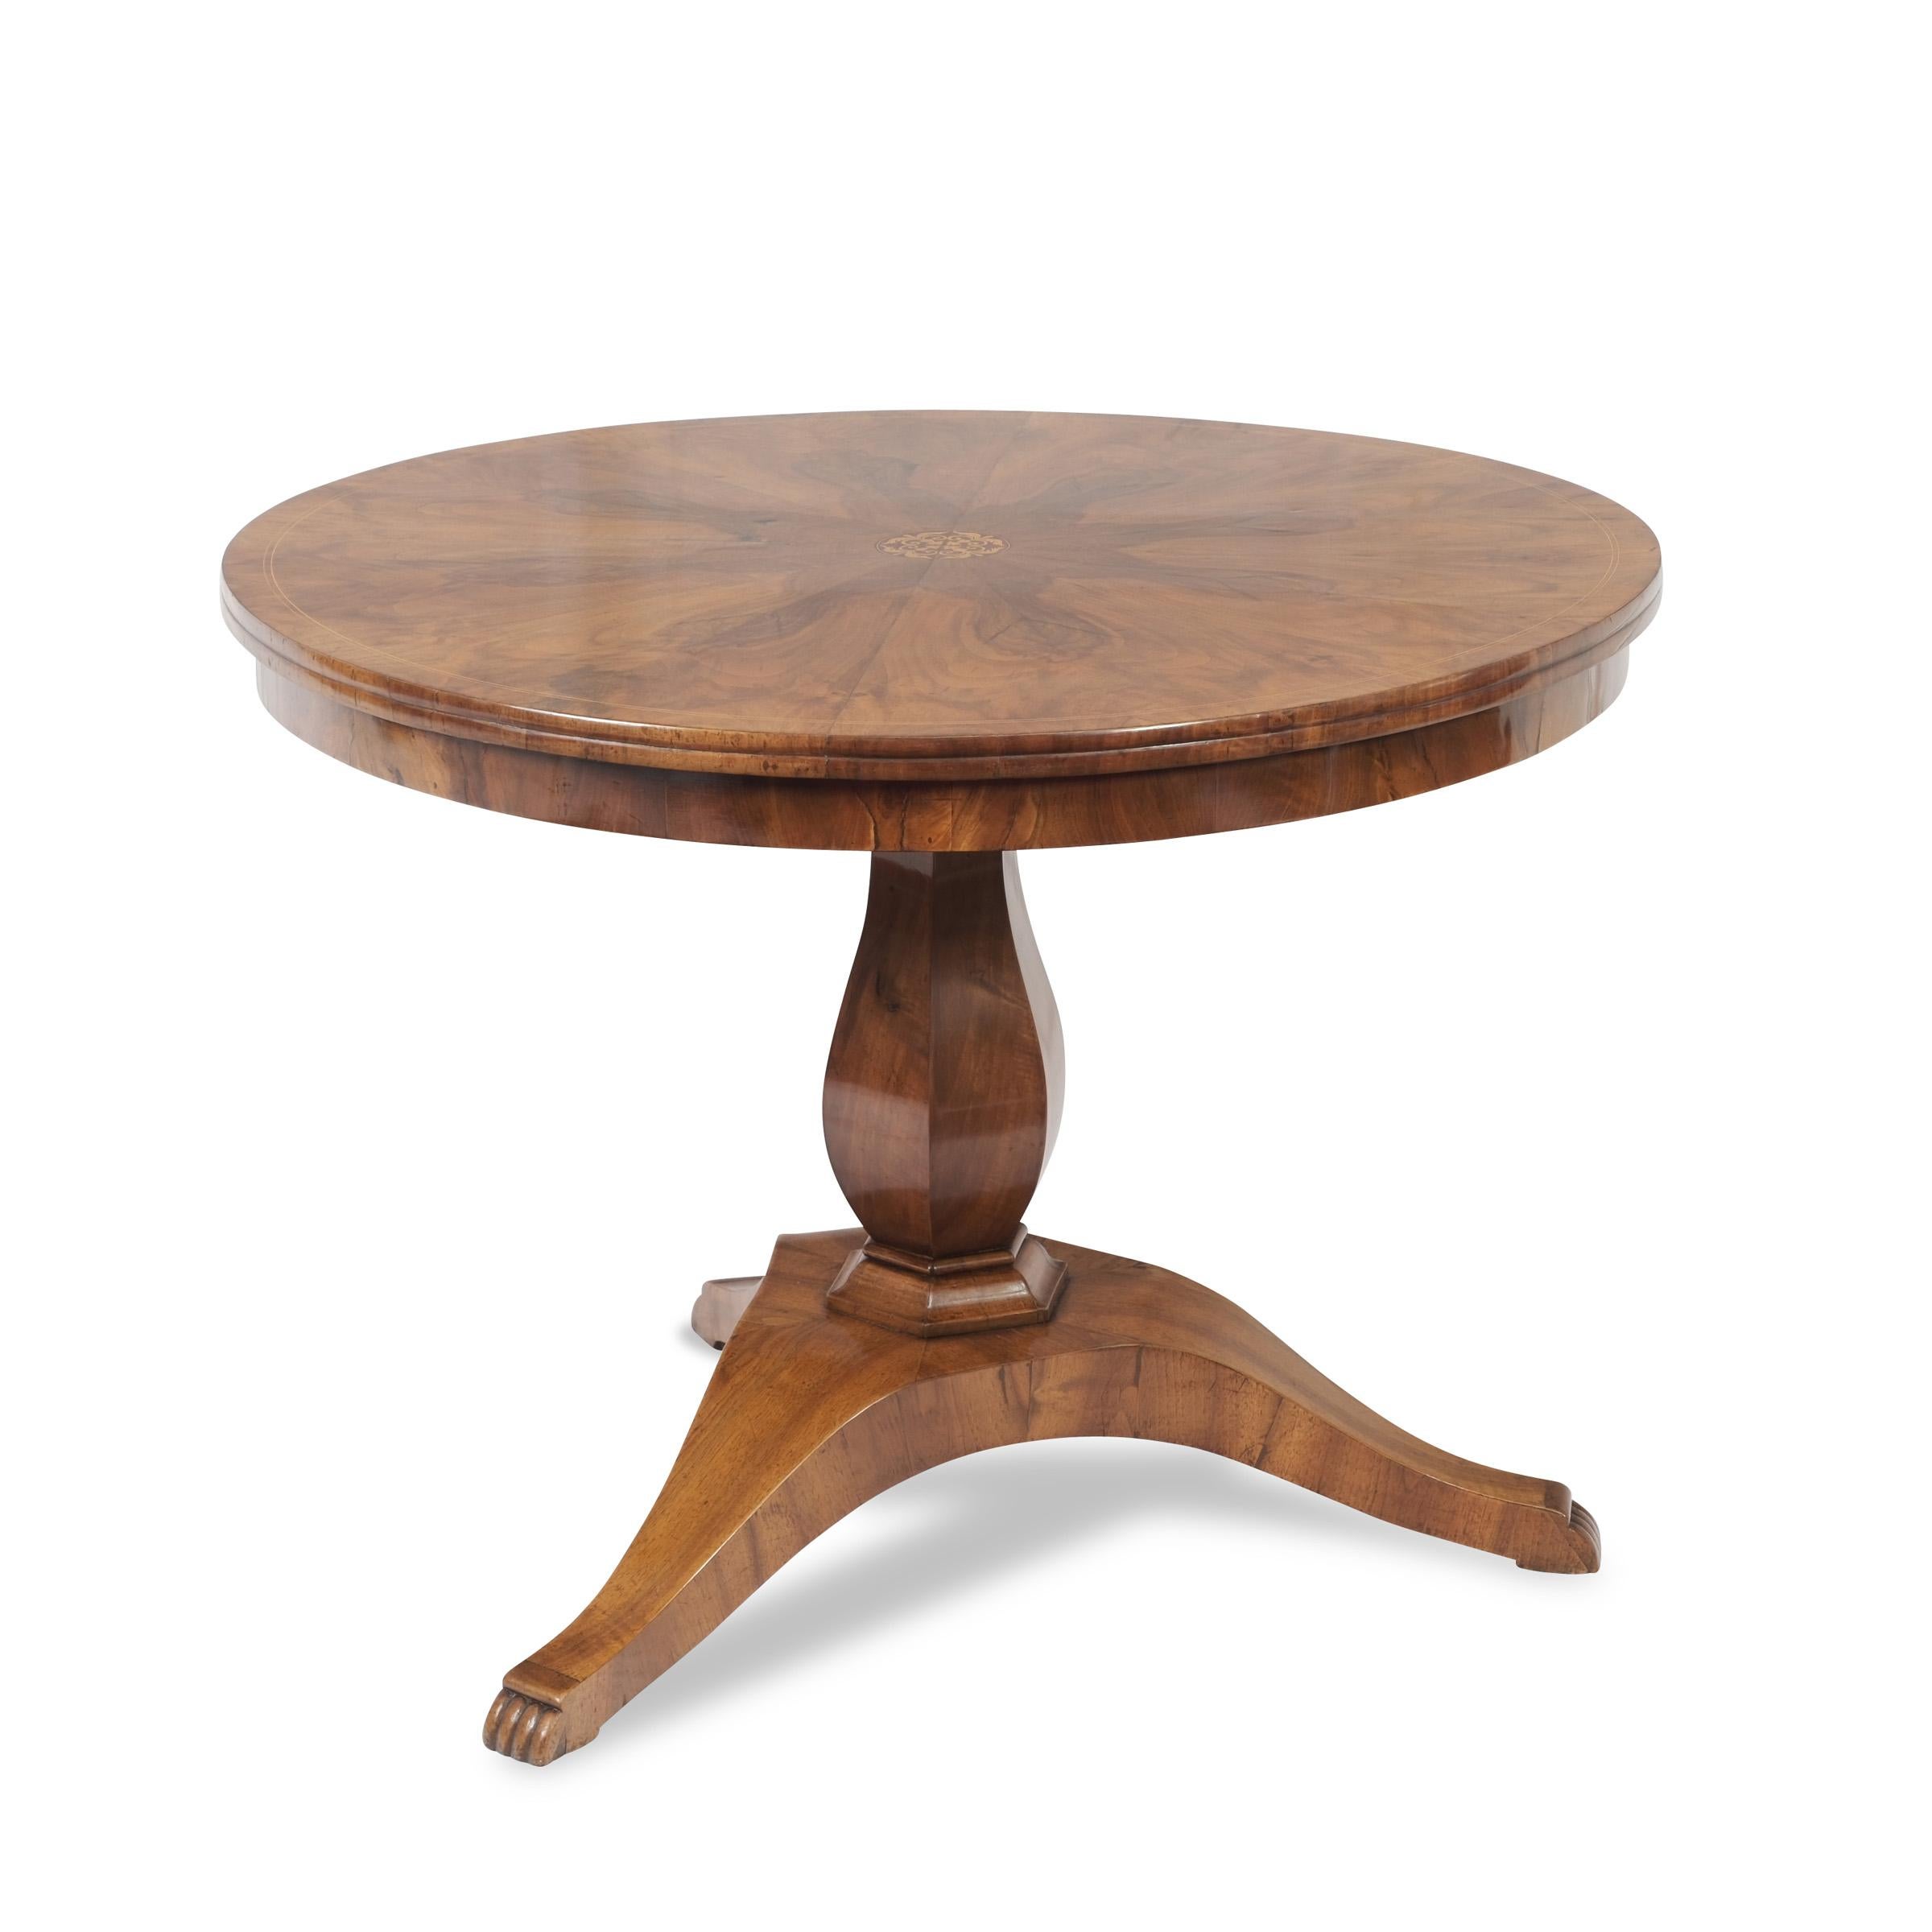 Saloon table, Biedermeier, around 1820/30

walnut veneered, top with star veneer and central decorative inlay, columnar leg with 3-pass foot, paw feet, restored condition, shellac polish

Dimensions: height: 76,5 cm - diameter: 102,5 cm